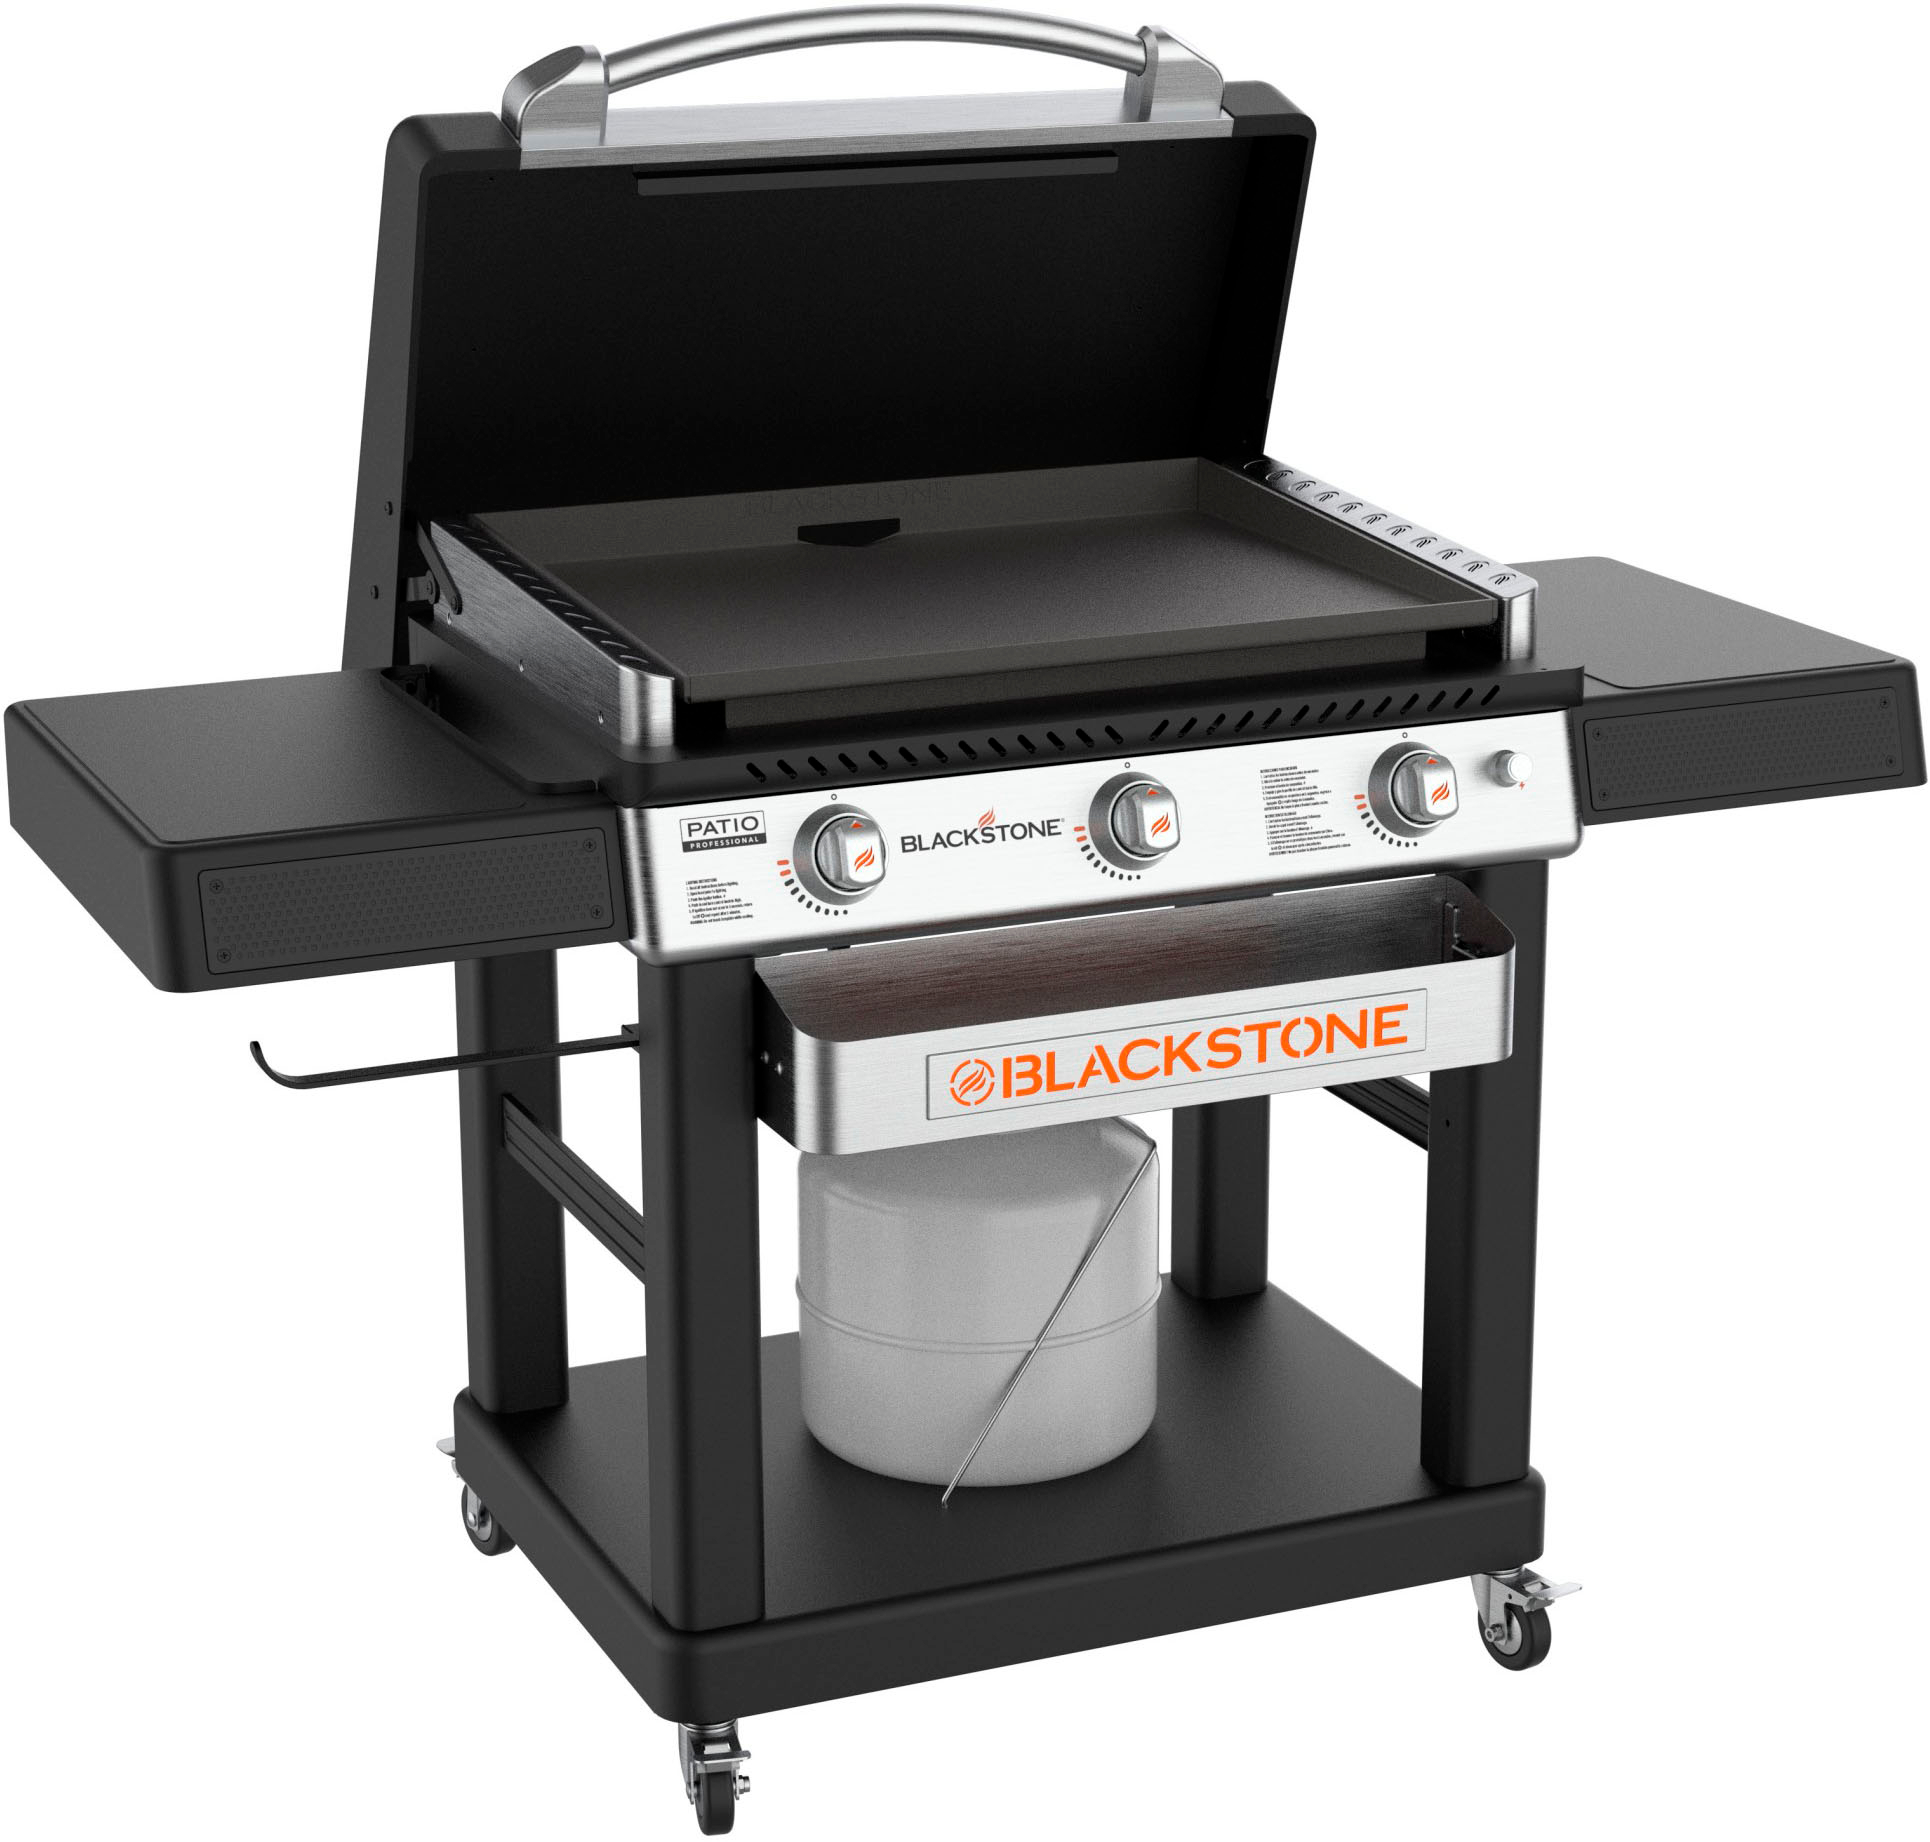 Angle View: Blackstone - 28-in. Outdoor Griddle - Black